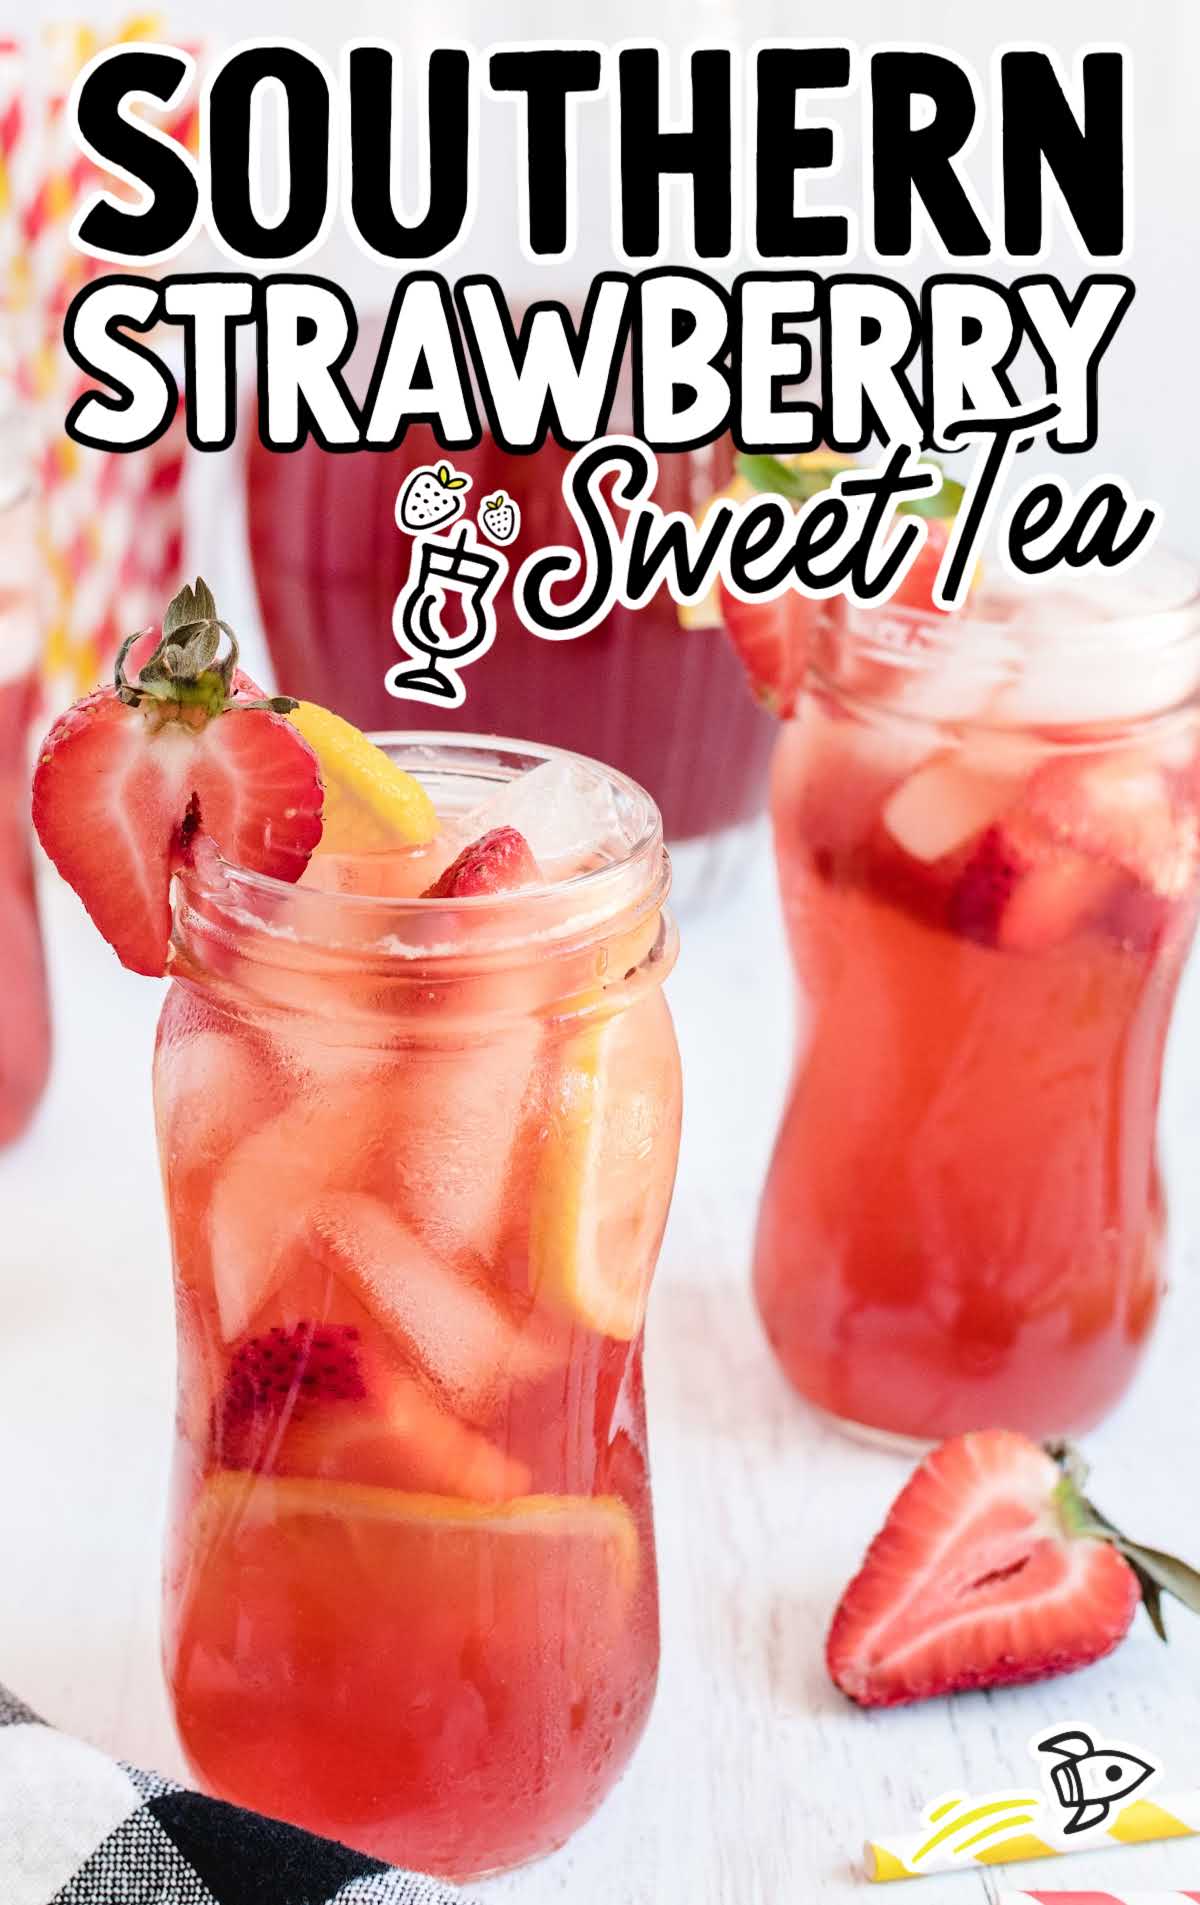 close up shot of glasses of Southern Strawberry Sweet Tea garnished with strawberry an lemon slices